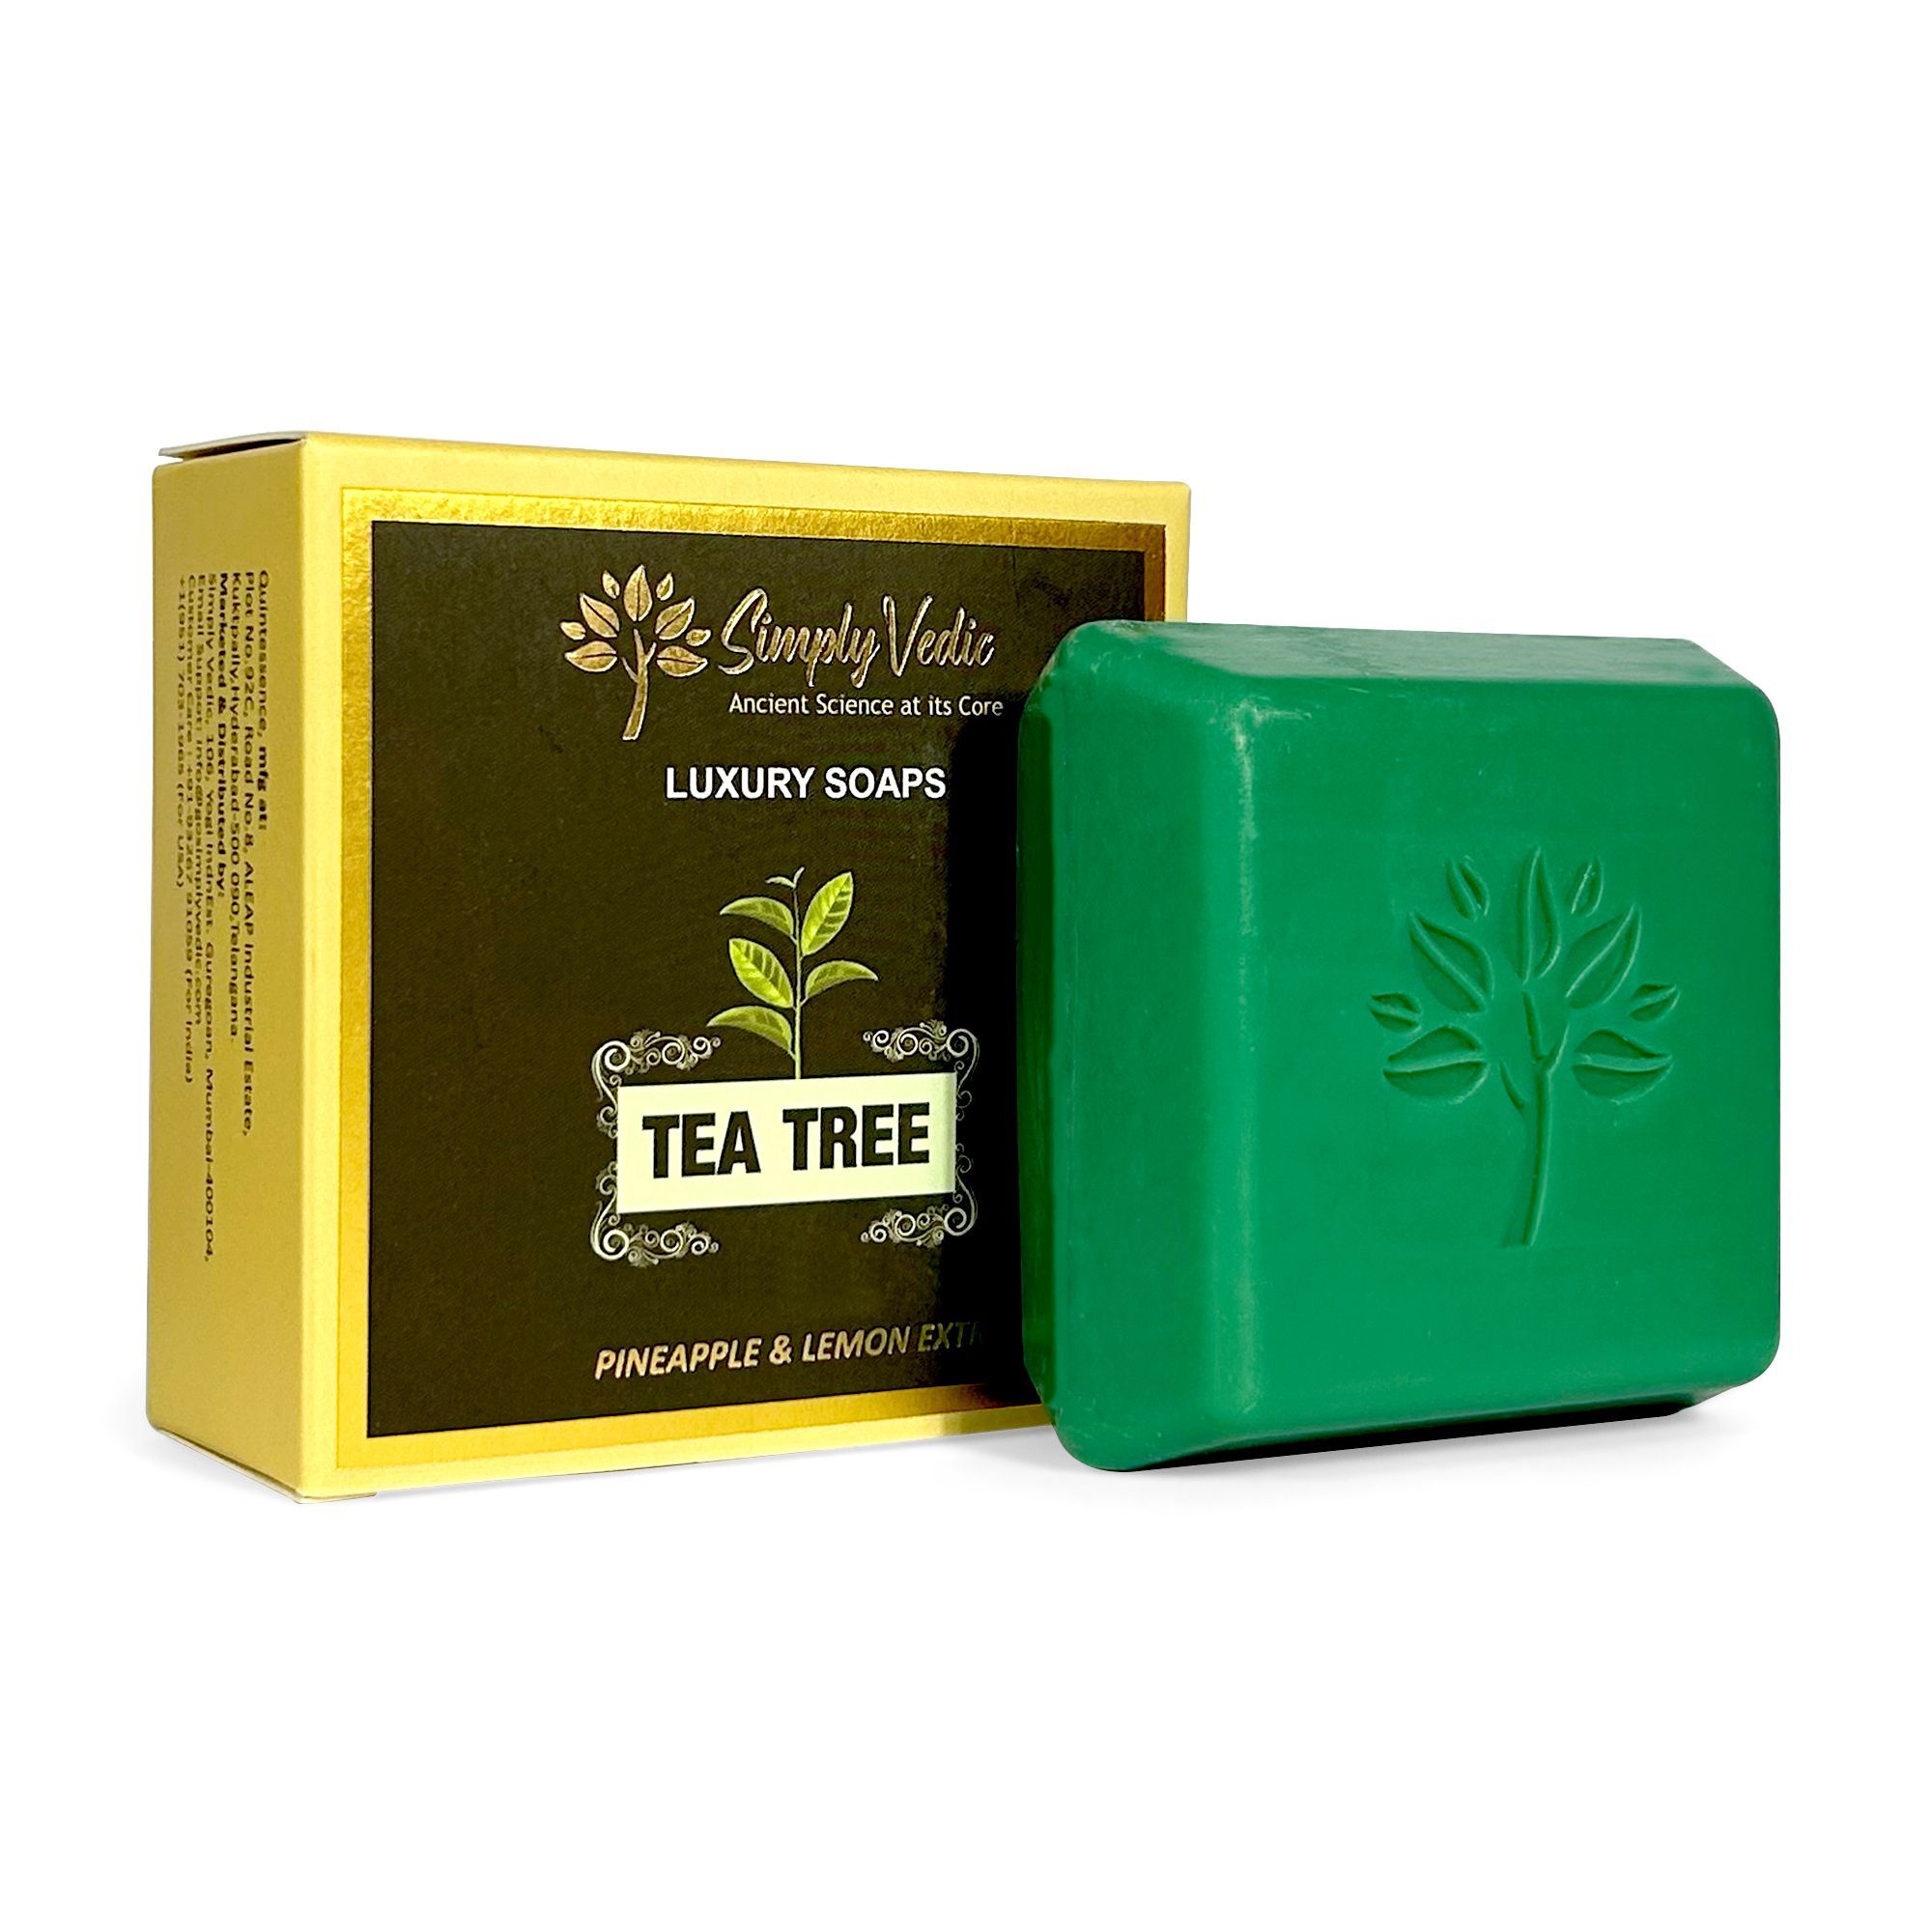 Simply Vedic Luxury Tea-Tree Soap Bar for Body, Hand, Face;| All Natural, Handmade, Pure & Gentle Moisturizing Bathing Soap.